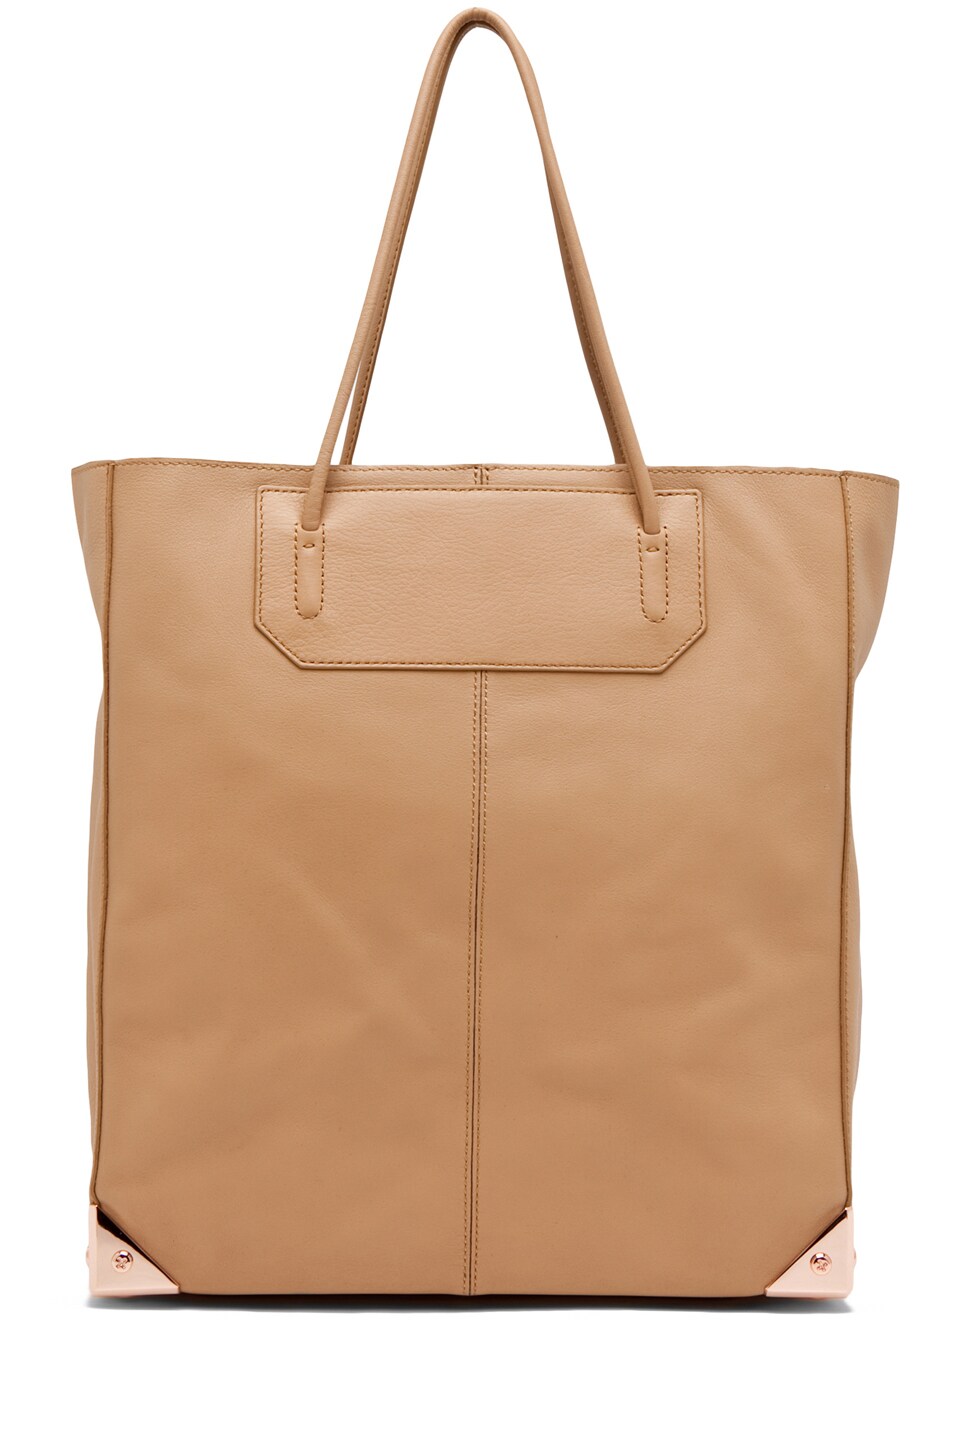 Image 1 of Alexander Wang Prisma Tote in Toffee